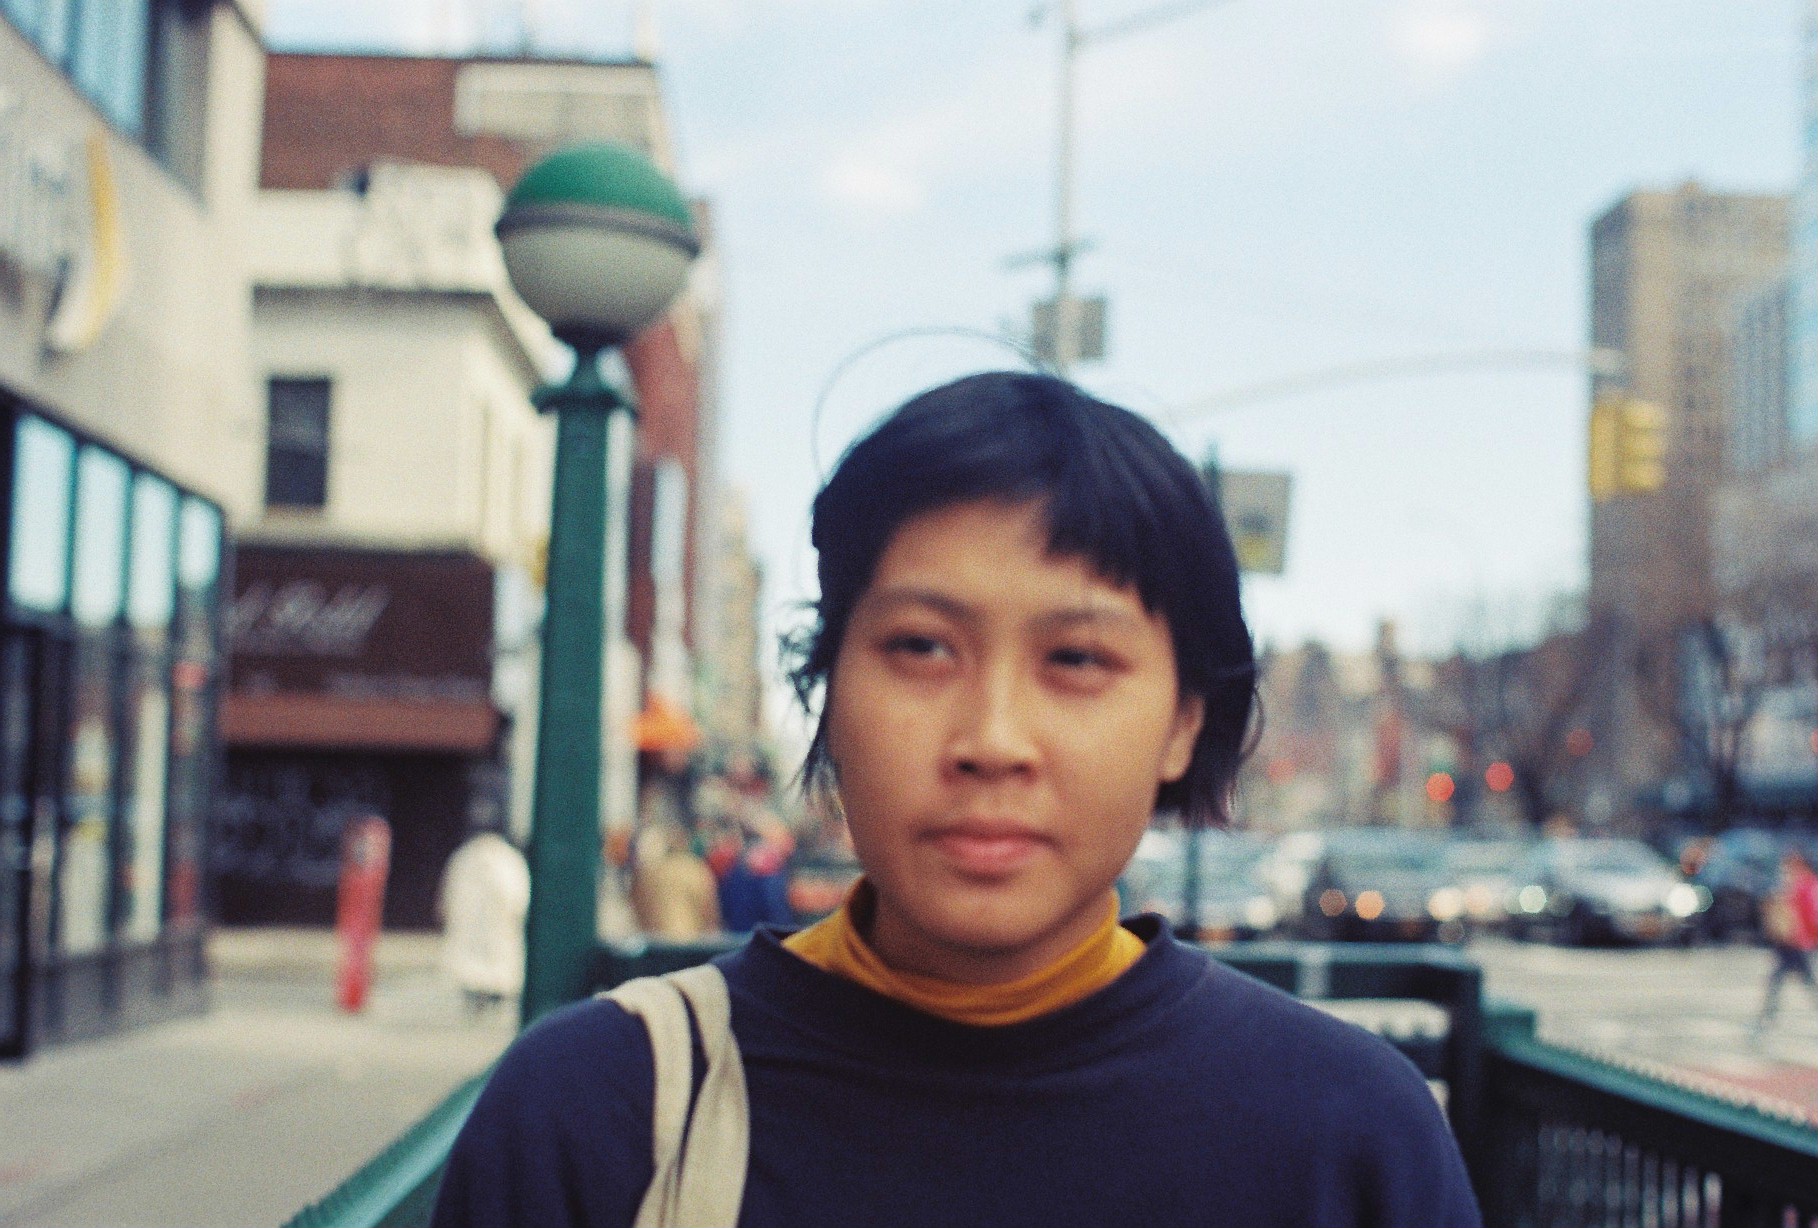 A headshot of Thao Ly, taken on the street. Thao is wearing a dark blue sweater and has a light coloured tote over her right shoulder. Thao looks off camera to the left. The street is blurred behind her.